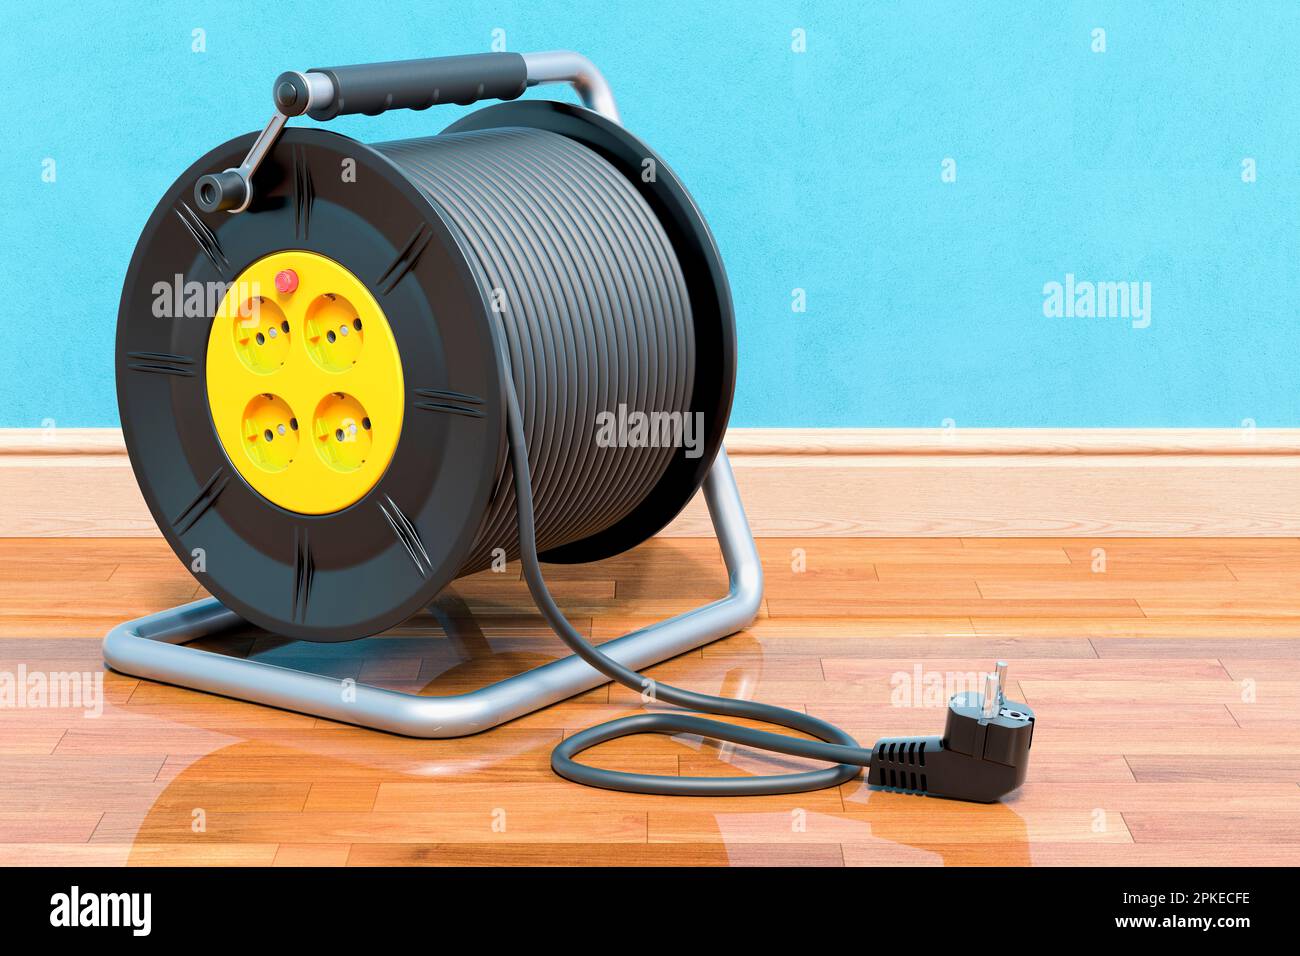 https://c8.alamy.com/comp/2PKECFE/industrial-cable-reel-in-room-near-wall-3d-rendering-2PKECFE.jpg